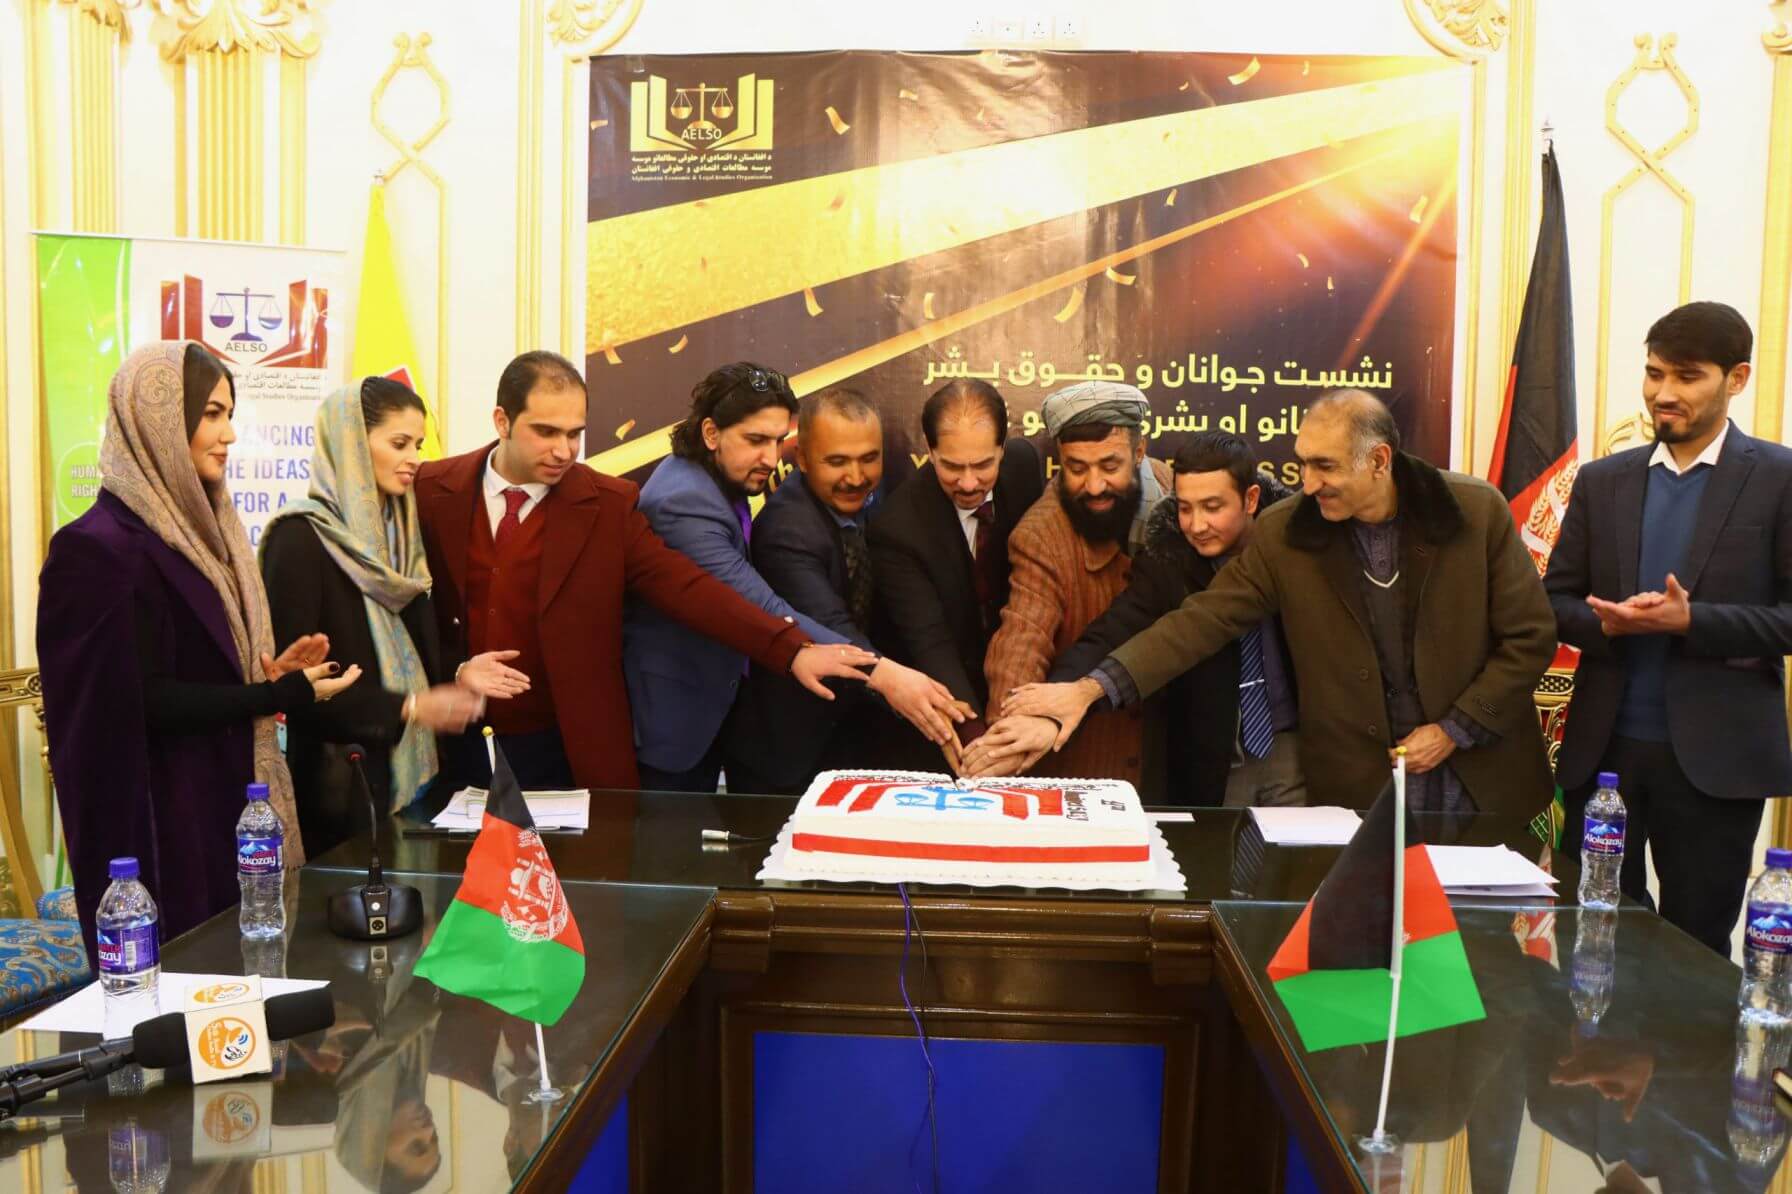 While cutting the anniversary cake by all the speakers of the summit...